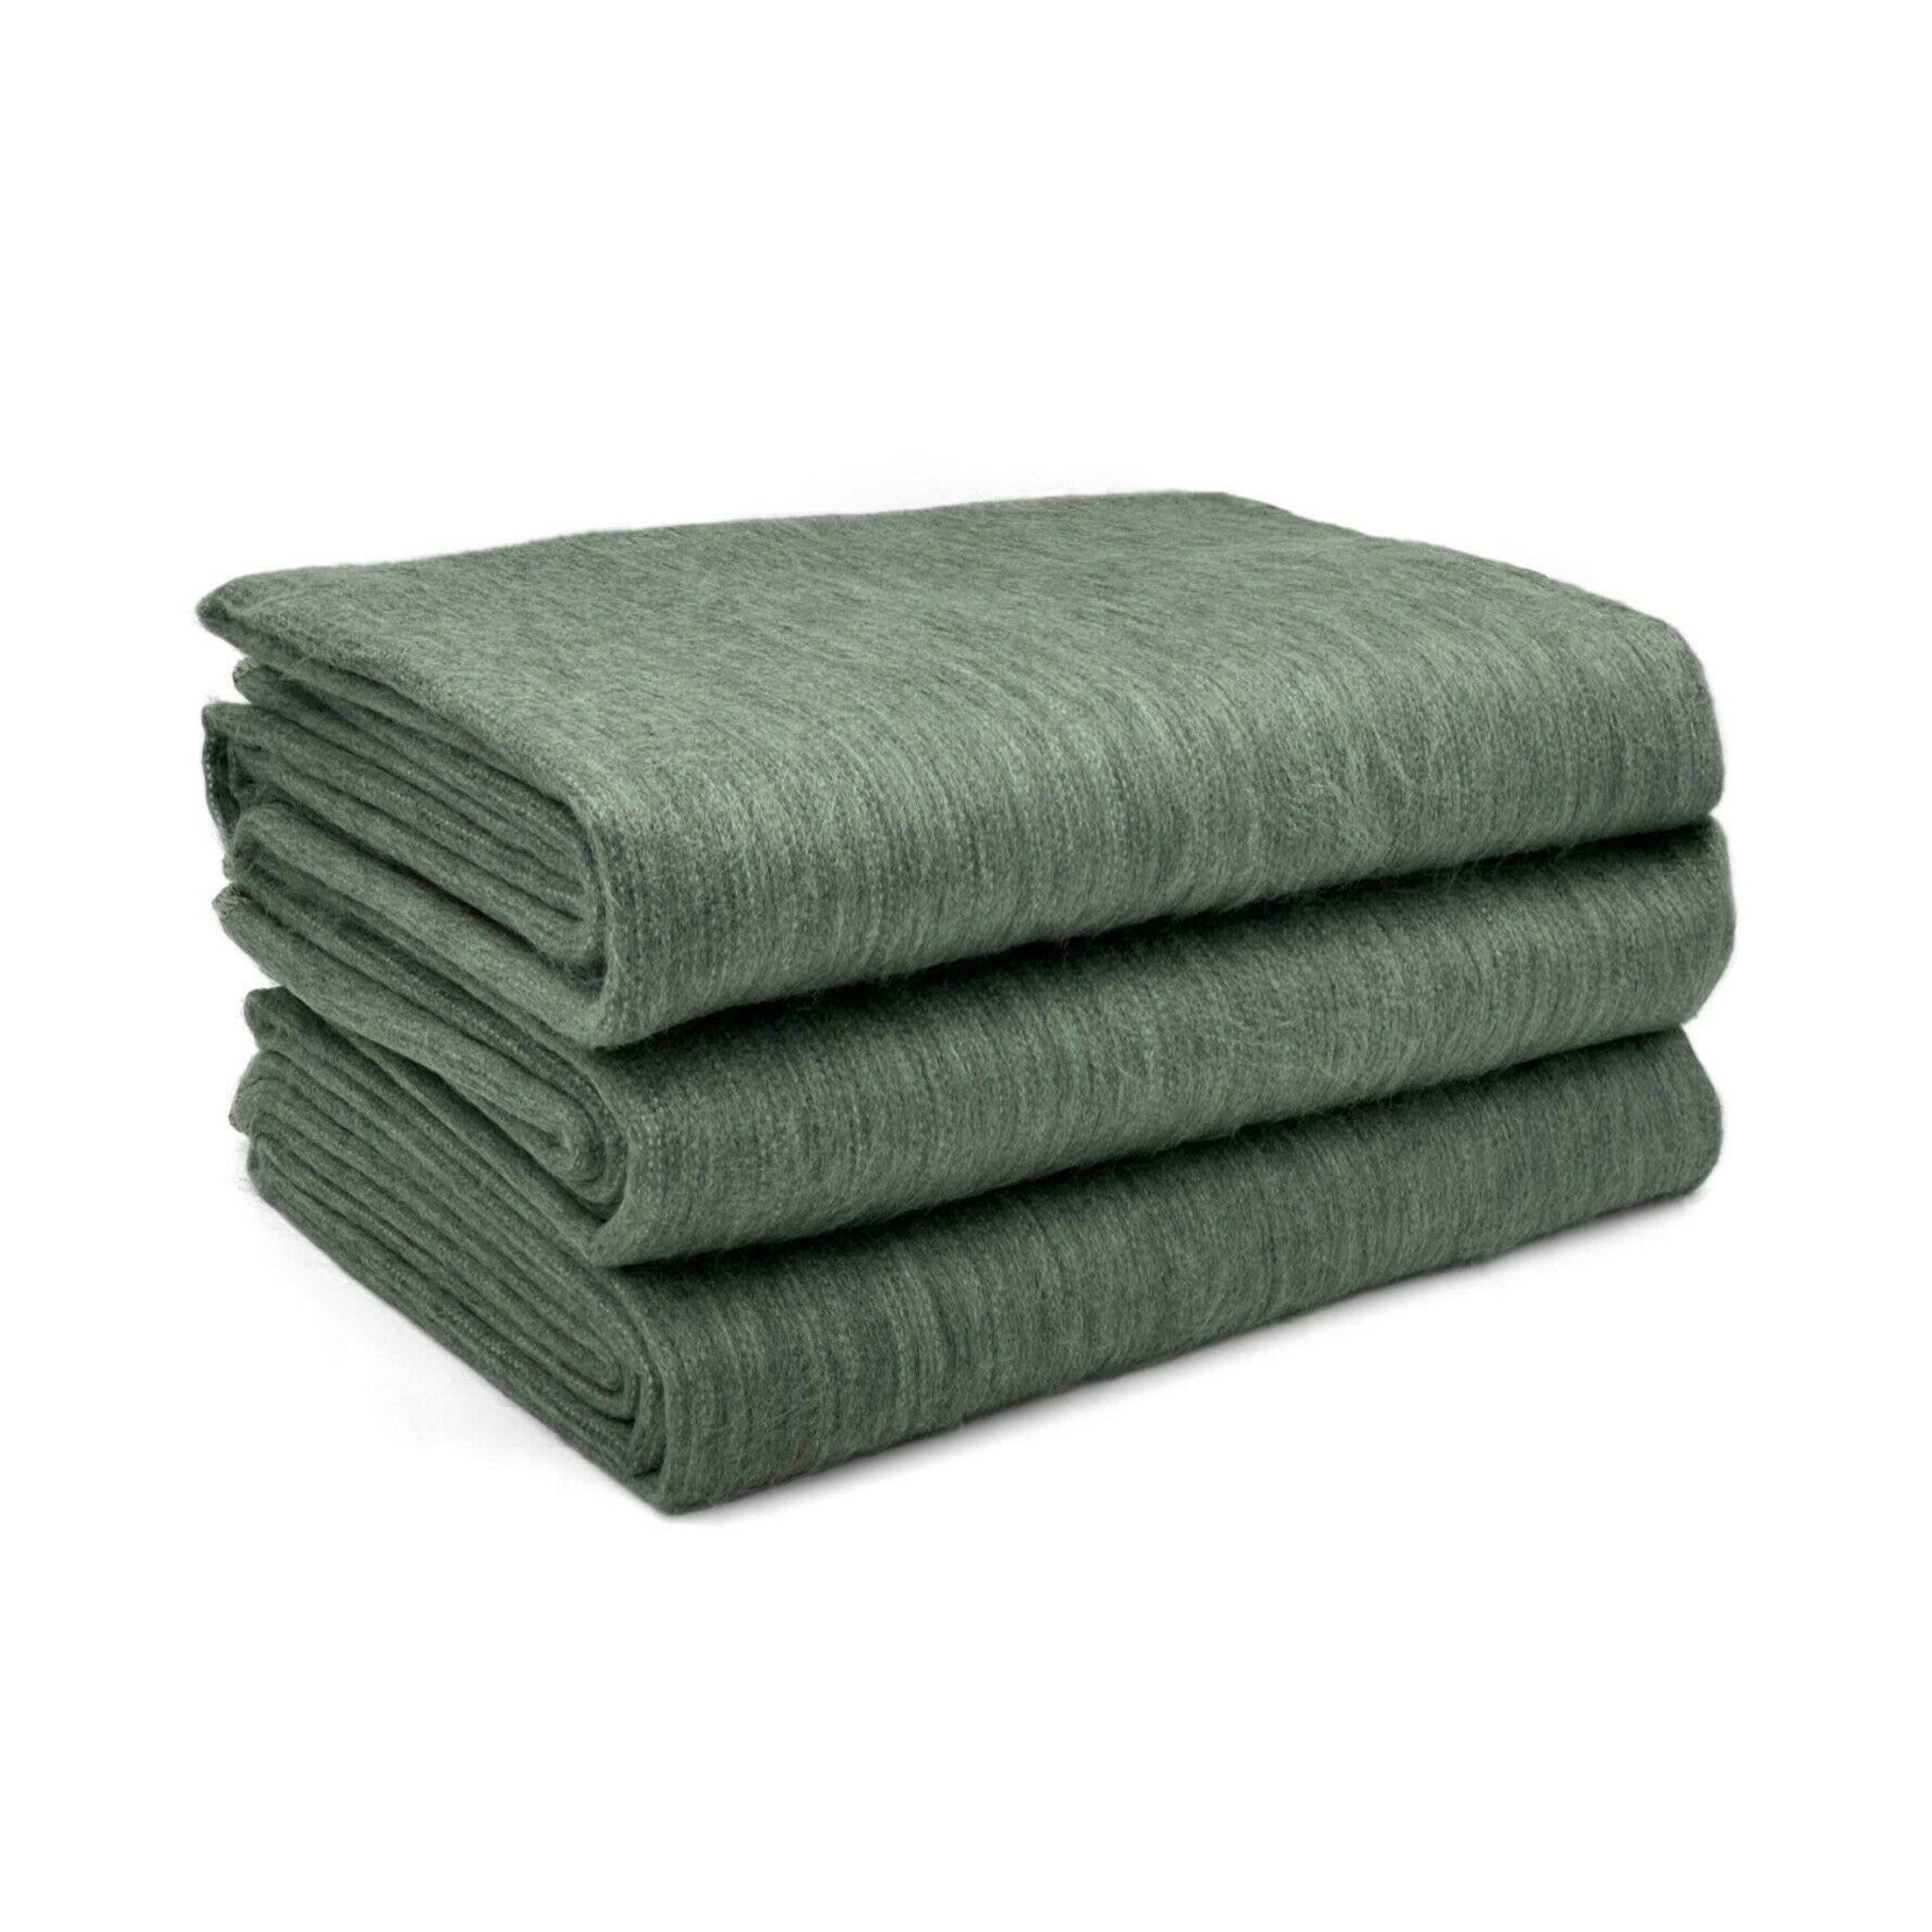 Simply Elevated - This beautiful alpaca wool blanket will keep you warm and cozy even on the coldest nights plus give your space a touch of class. Alpaca blankets are the finest in the world. It is incredibly soft and warm. It is also easy to wash and dries very quickly. 